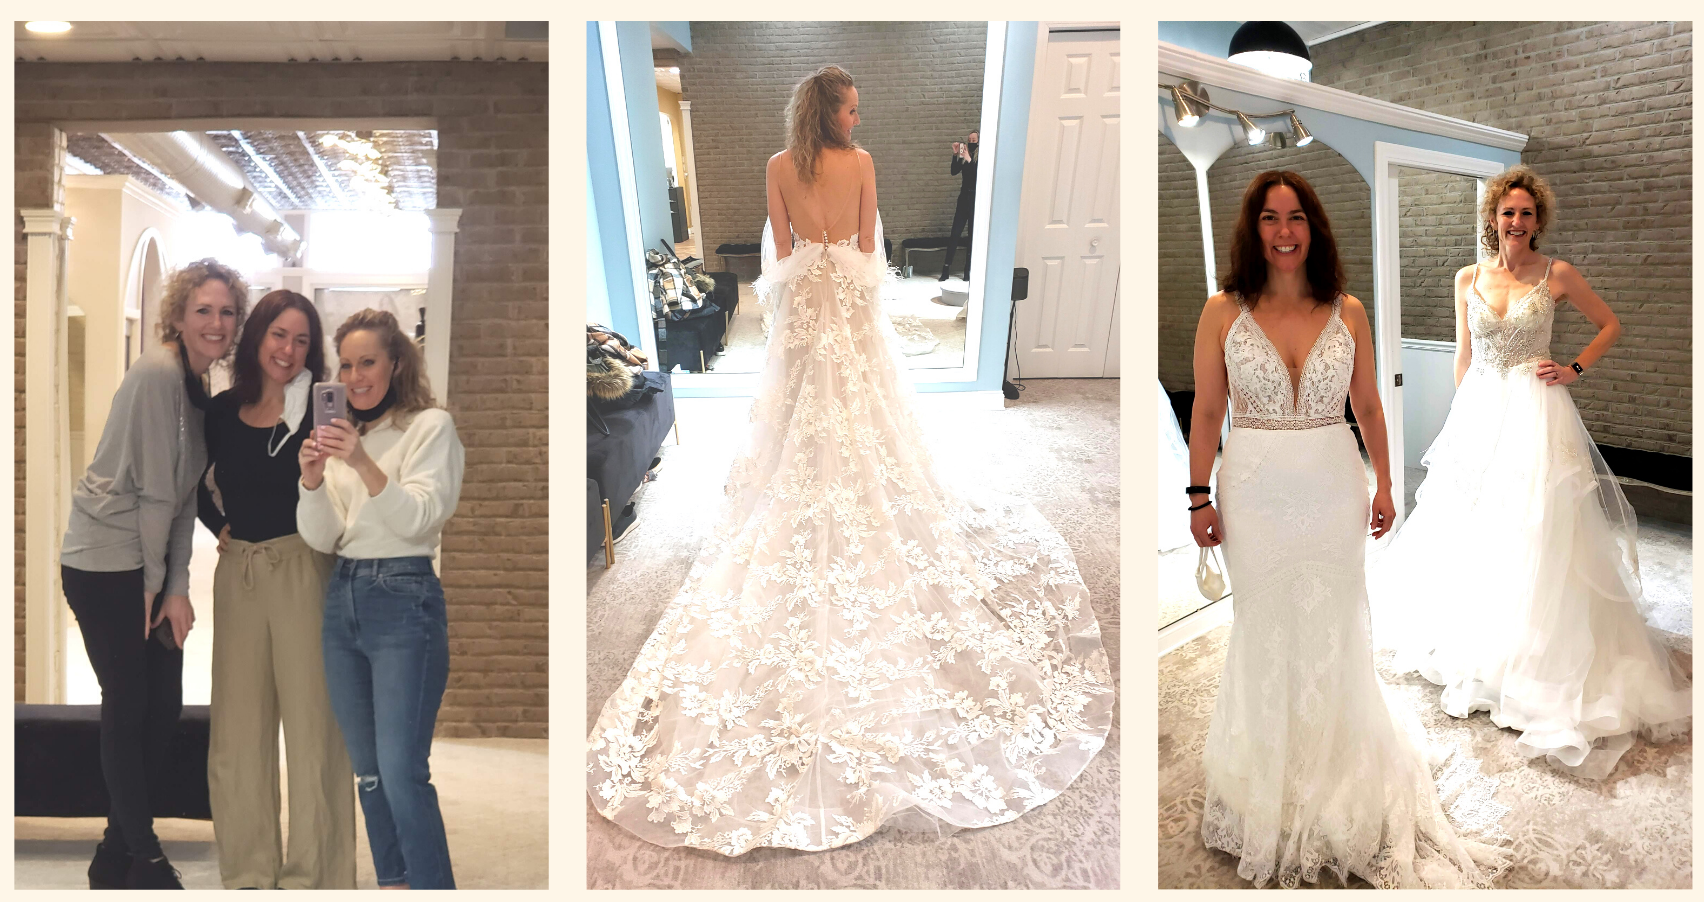 3 pictures of women in wedding gowns